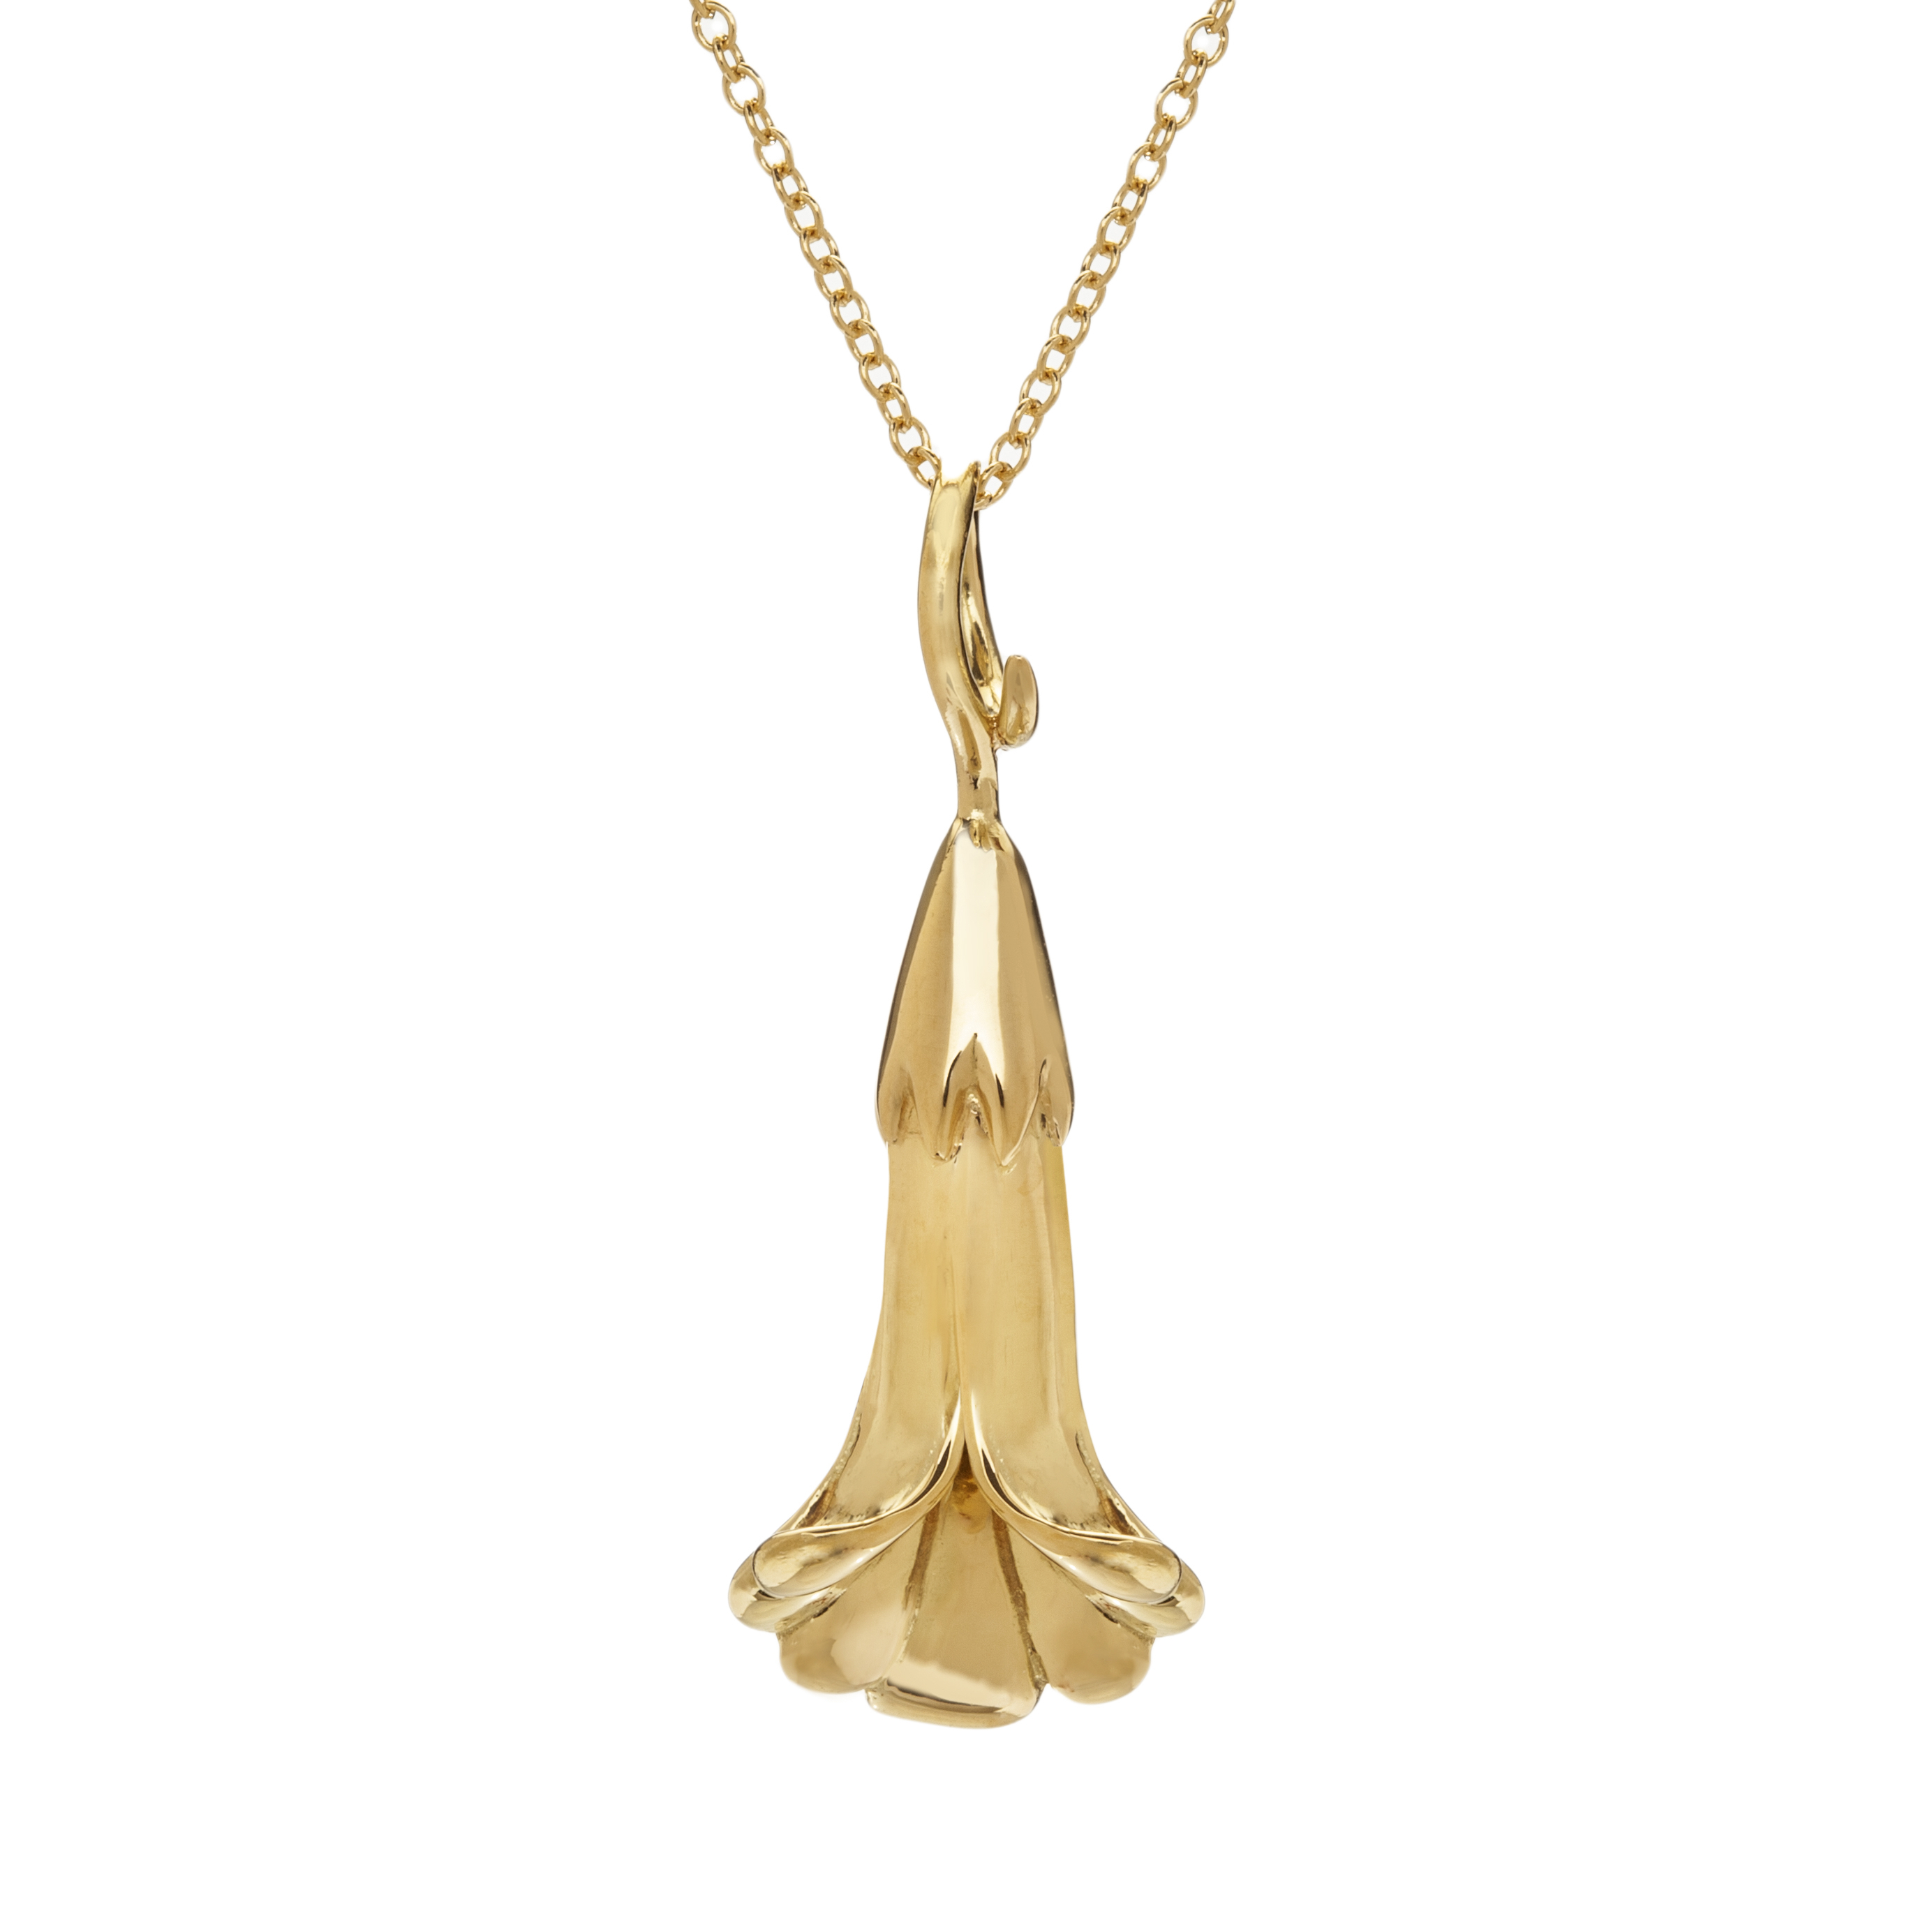 Christina Malle Fairmined Gold 18 Karat Longflower Necklace, on a 18 Karat Fairmined Gold Chain. The Flora Collection